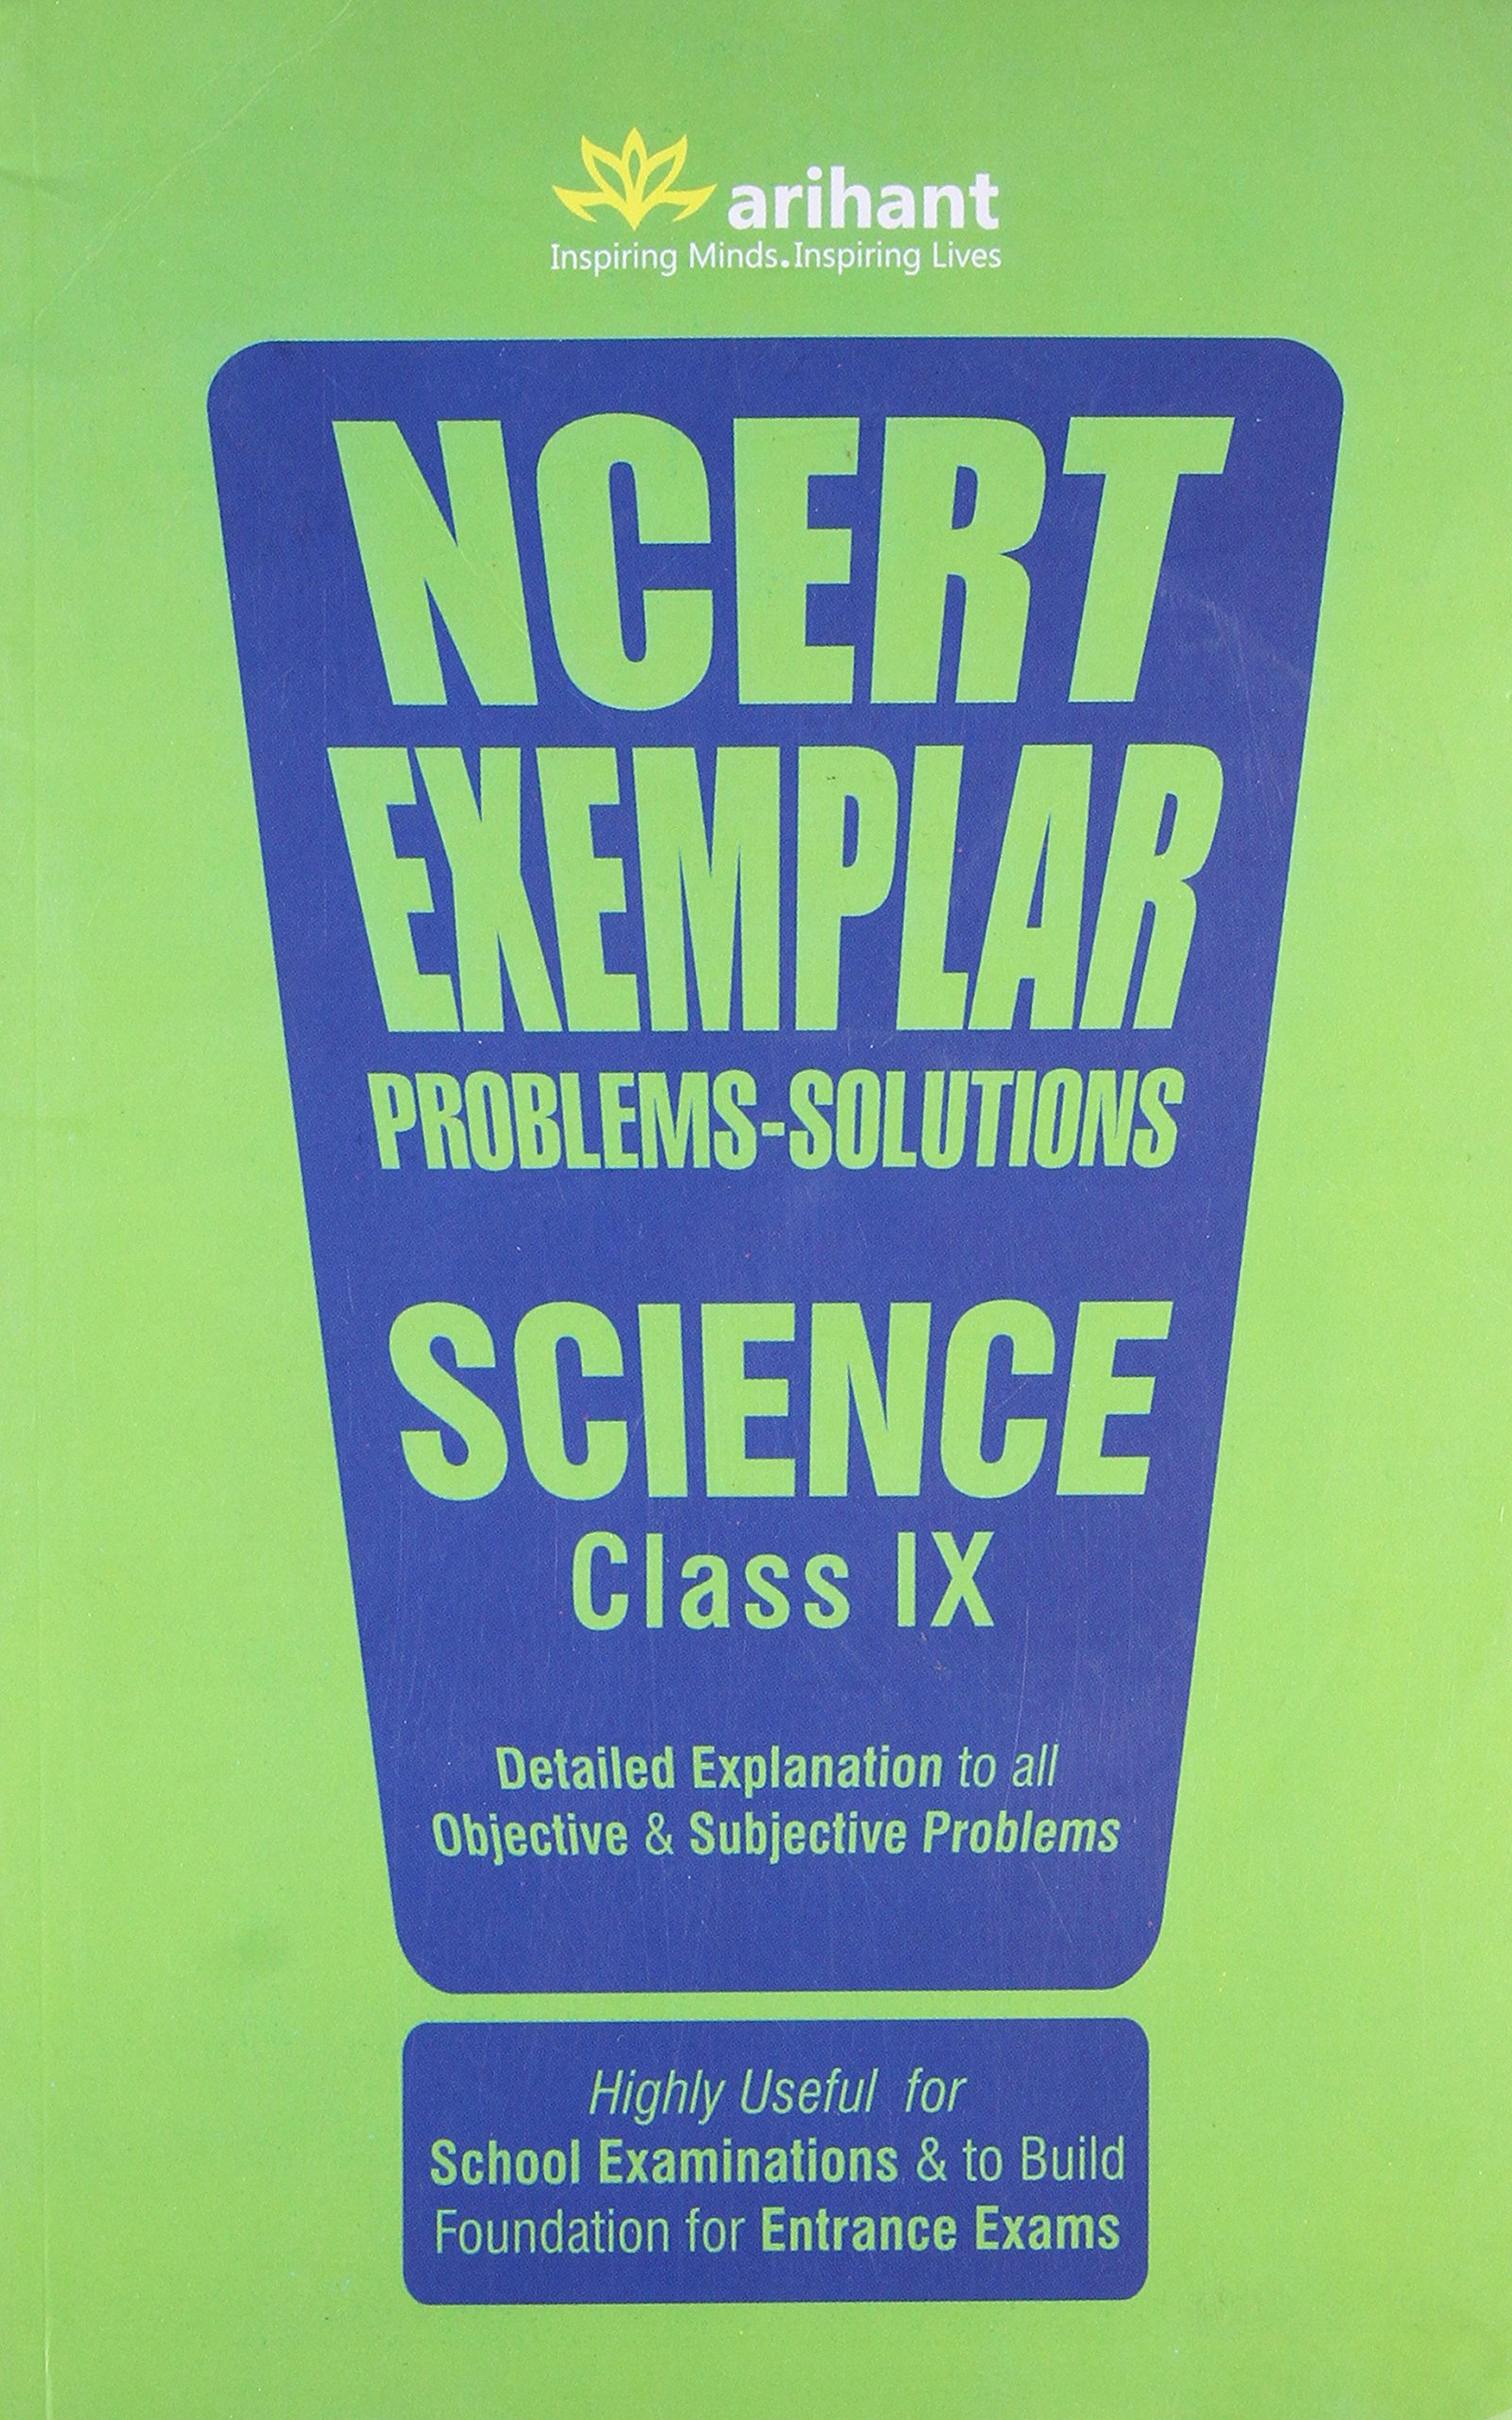 NCERT Exemplar Problems-Solutions SCIENCE class 9th